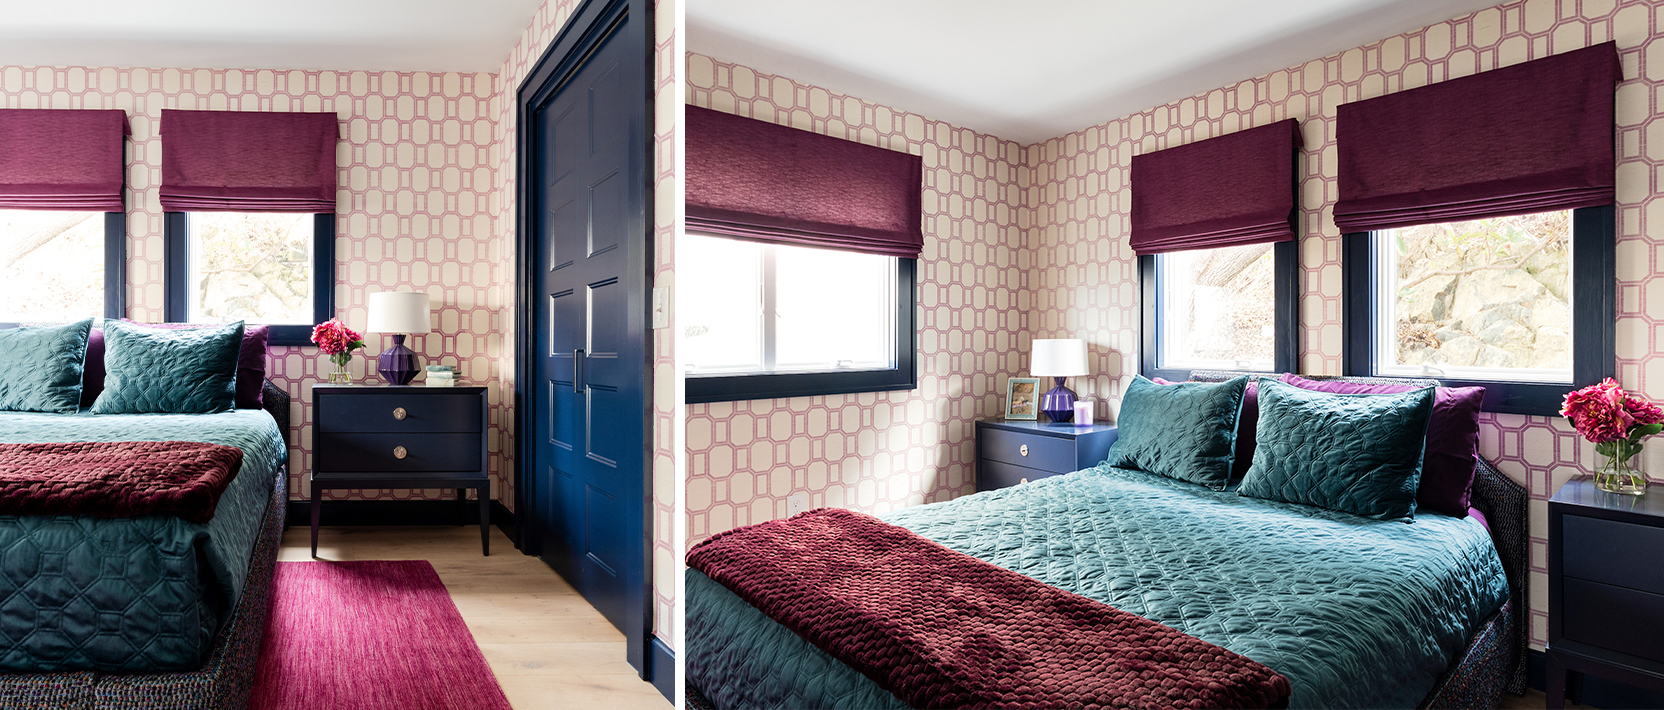 Guest bedroom with patterned wallpaper, teal and maroon bedding and window treatments, and navy painted trim and doors.